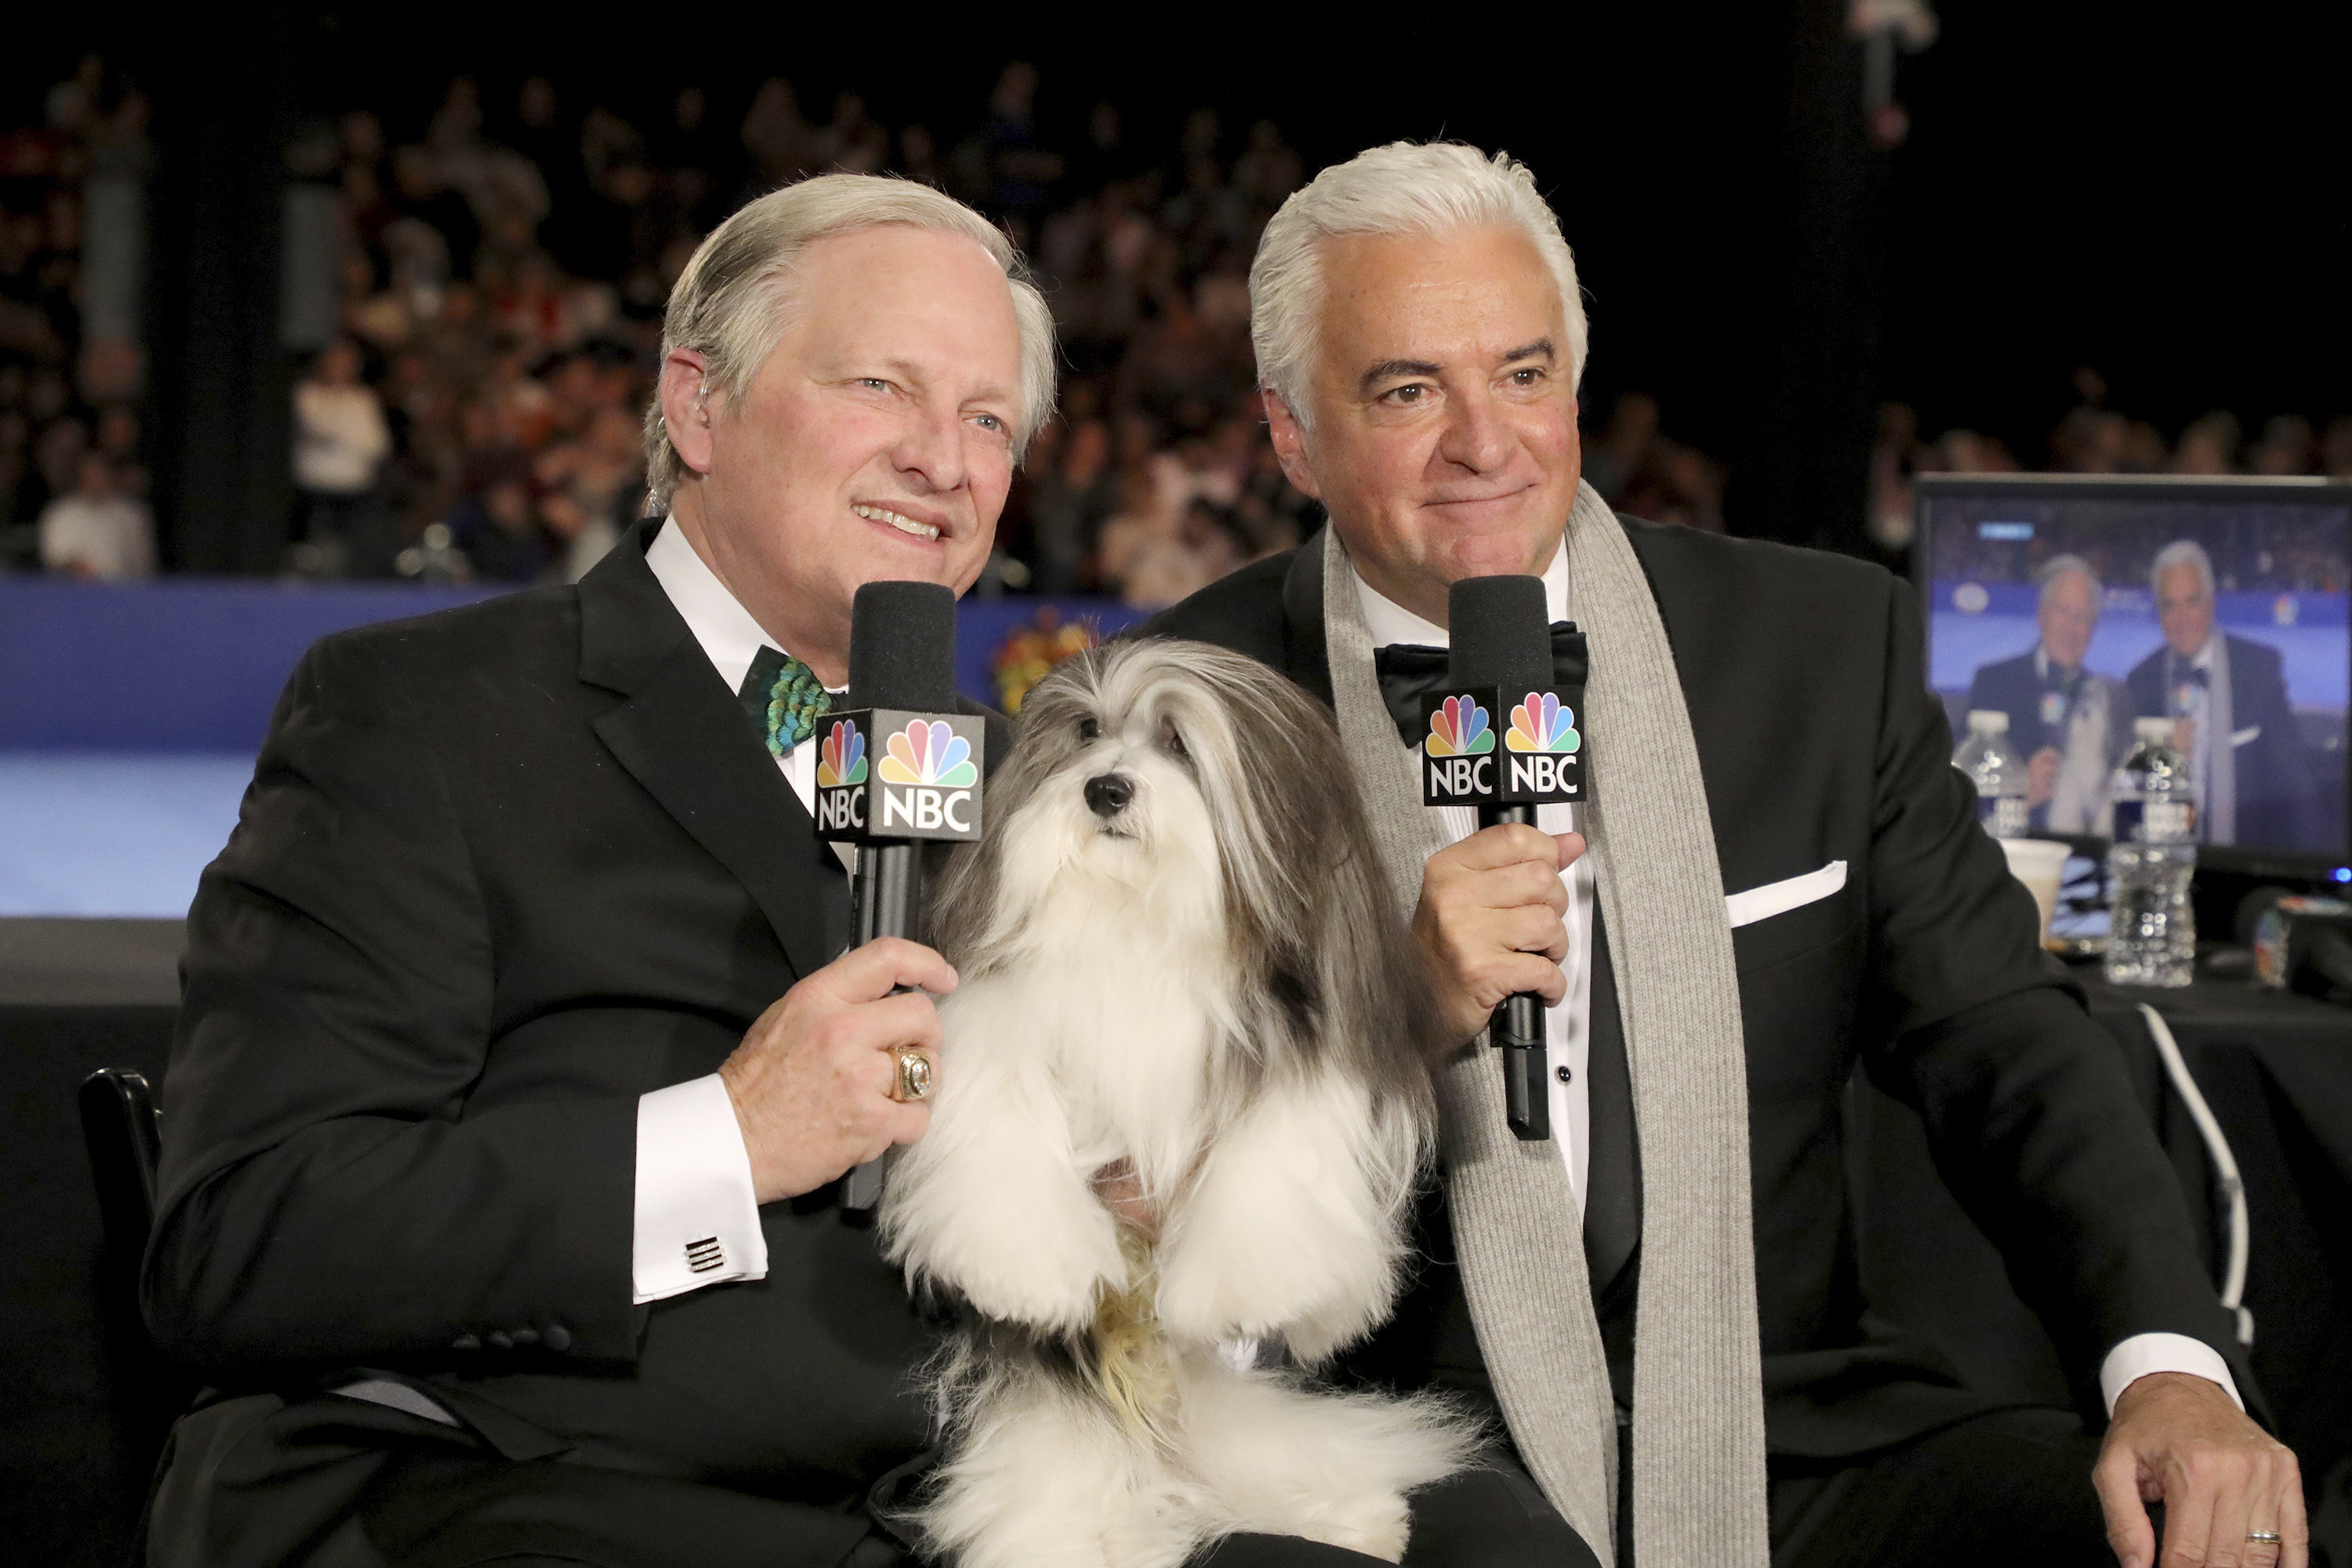 which dog won the national dog show